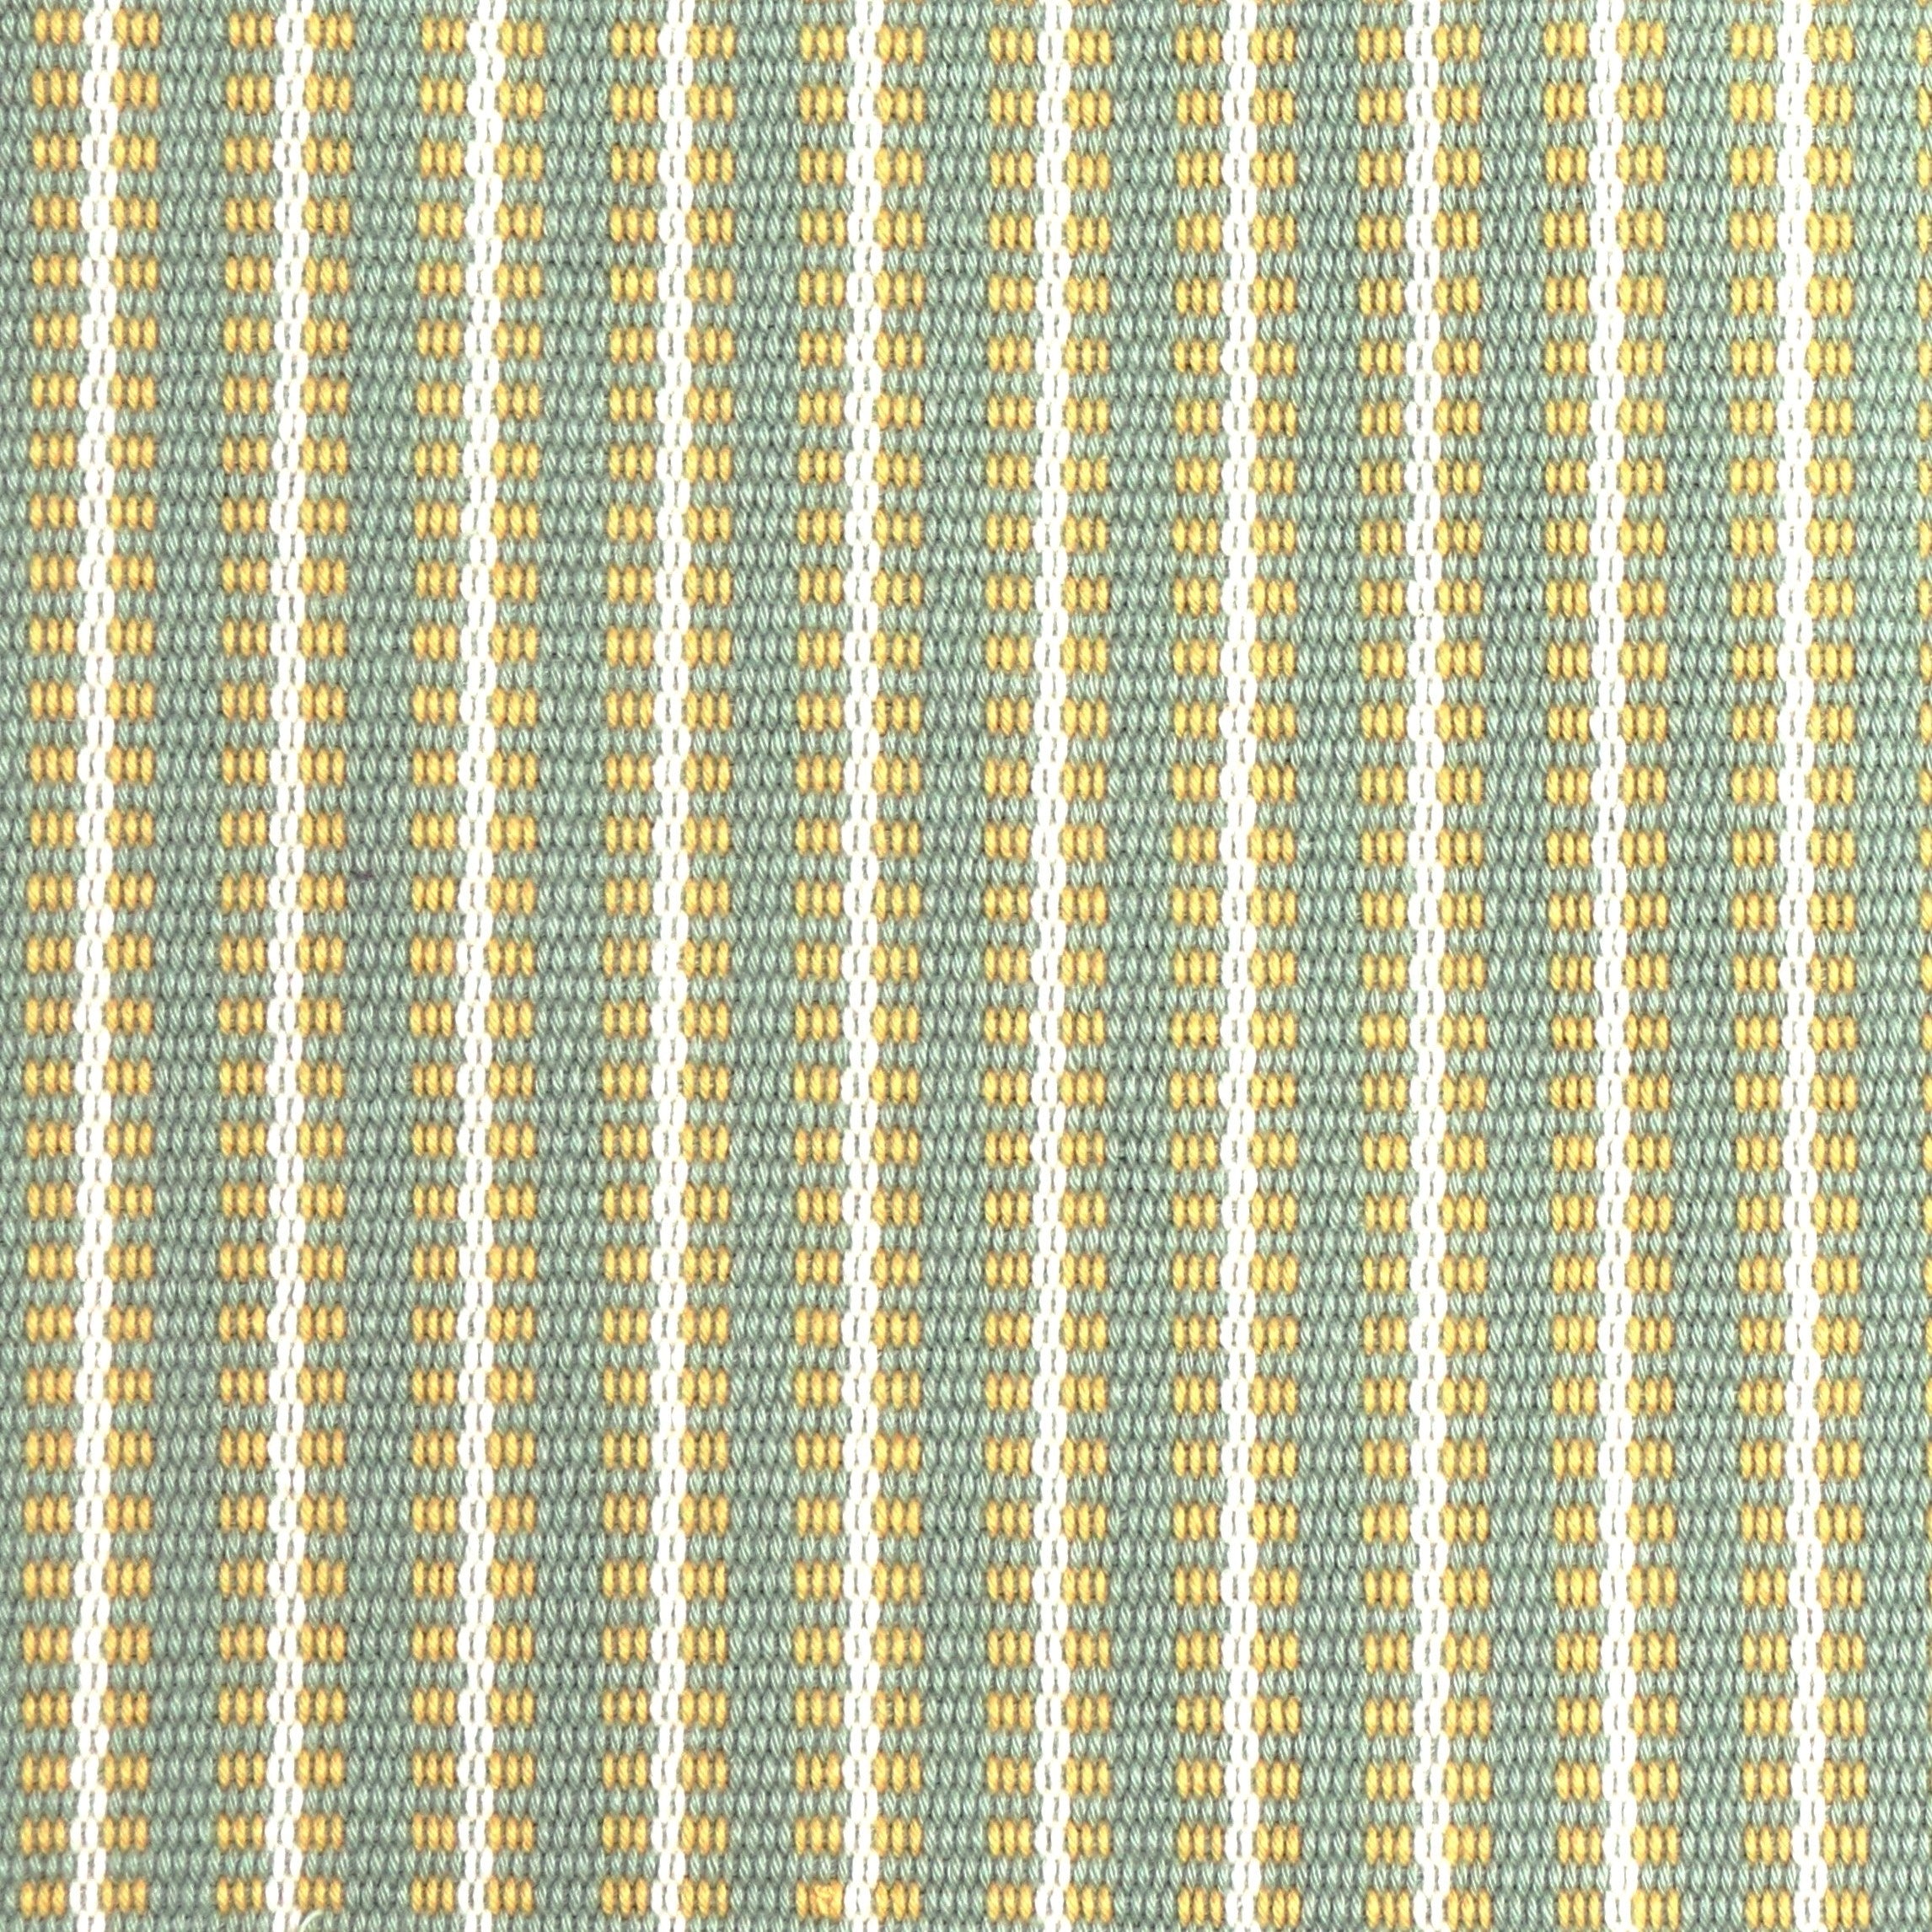 Detail of a hand-woven cotton fabric in an intricate gridded stripe pattern in shades of white, yellow and sage.